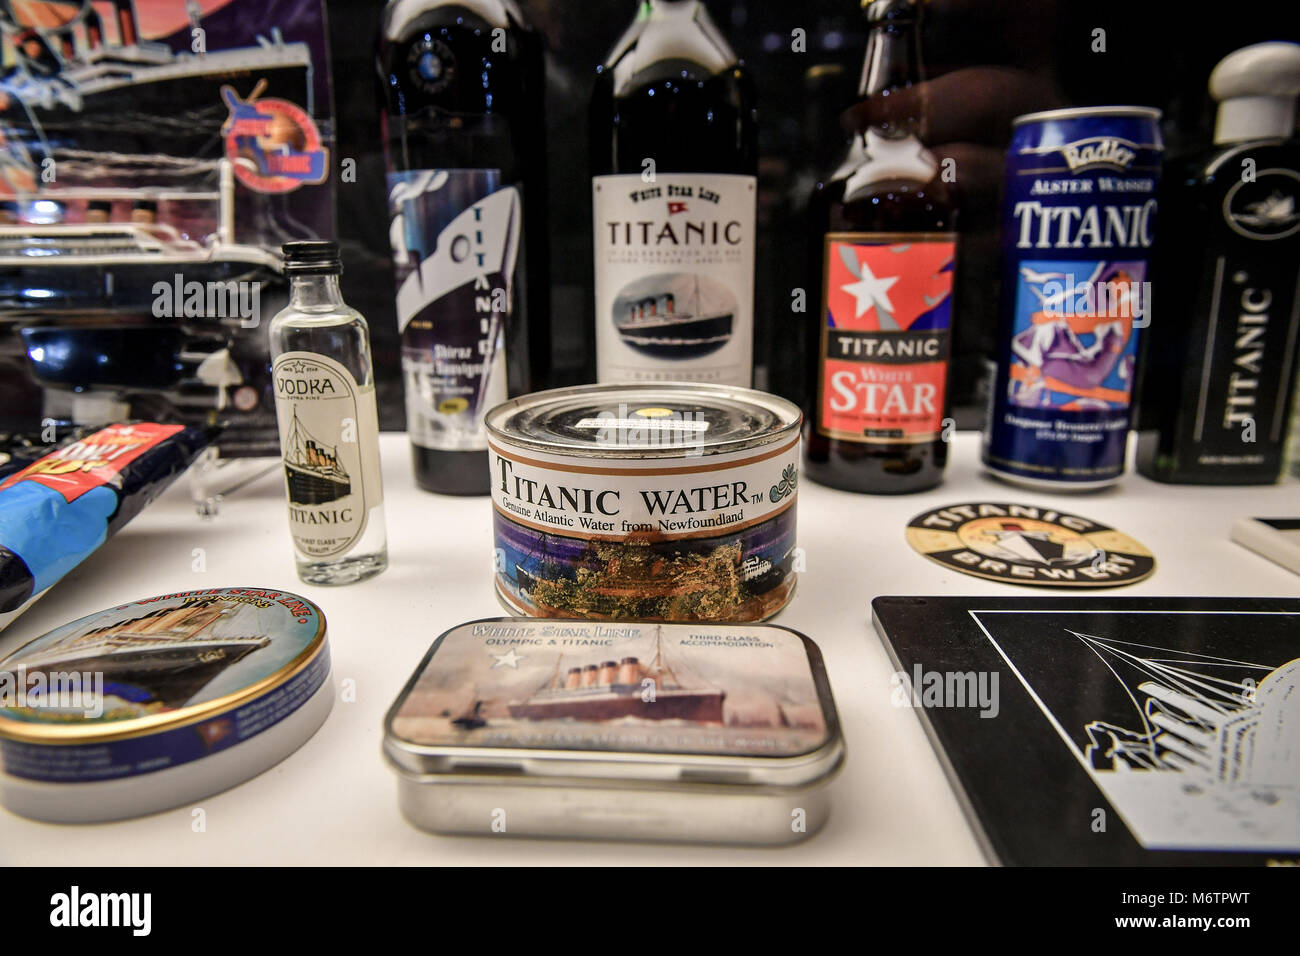 Titanic themed items, including a can of water from where RMS Titanic sunk, on display during a preview of the Titanic Stories exhibition at the National Maritime Museum Cornwall, Falmouth, which opens on March 8. Stock Photo